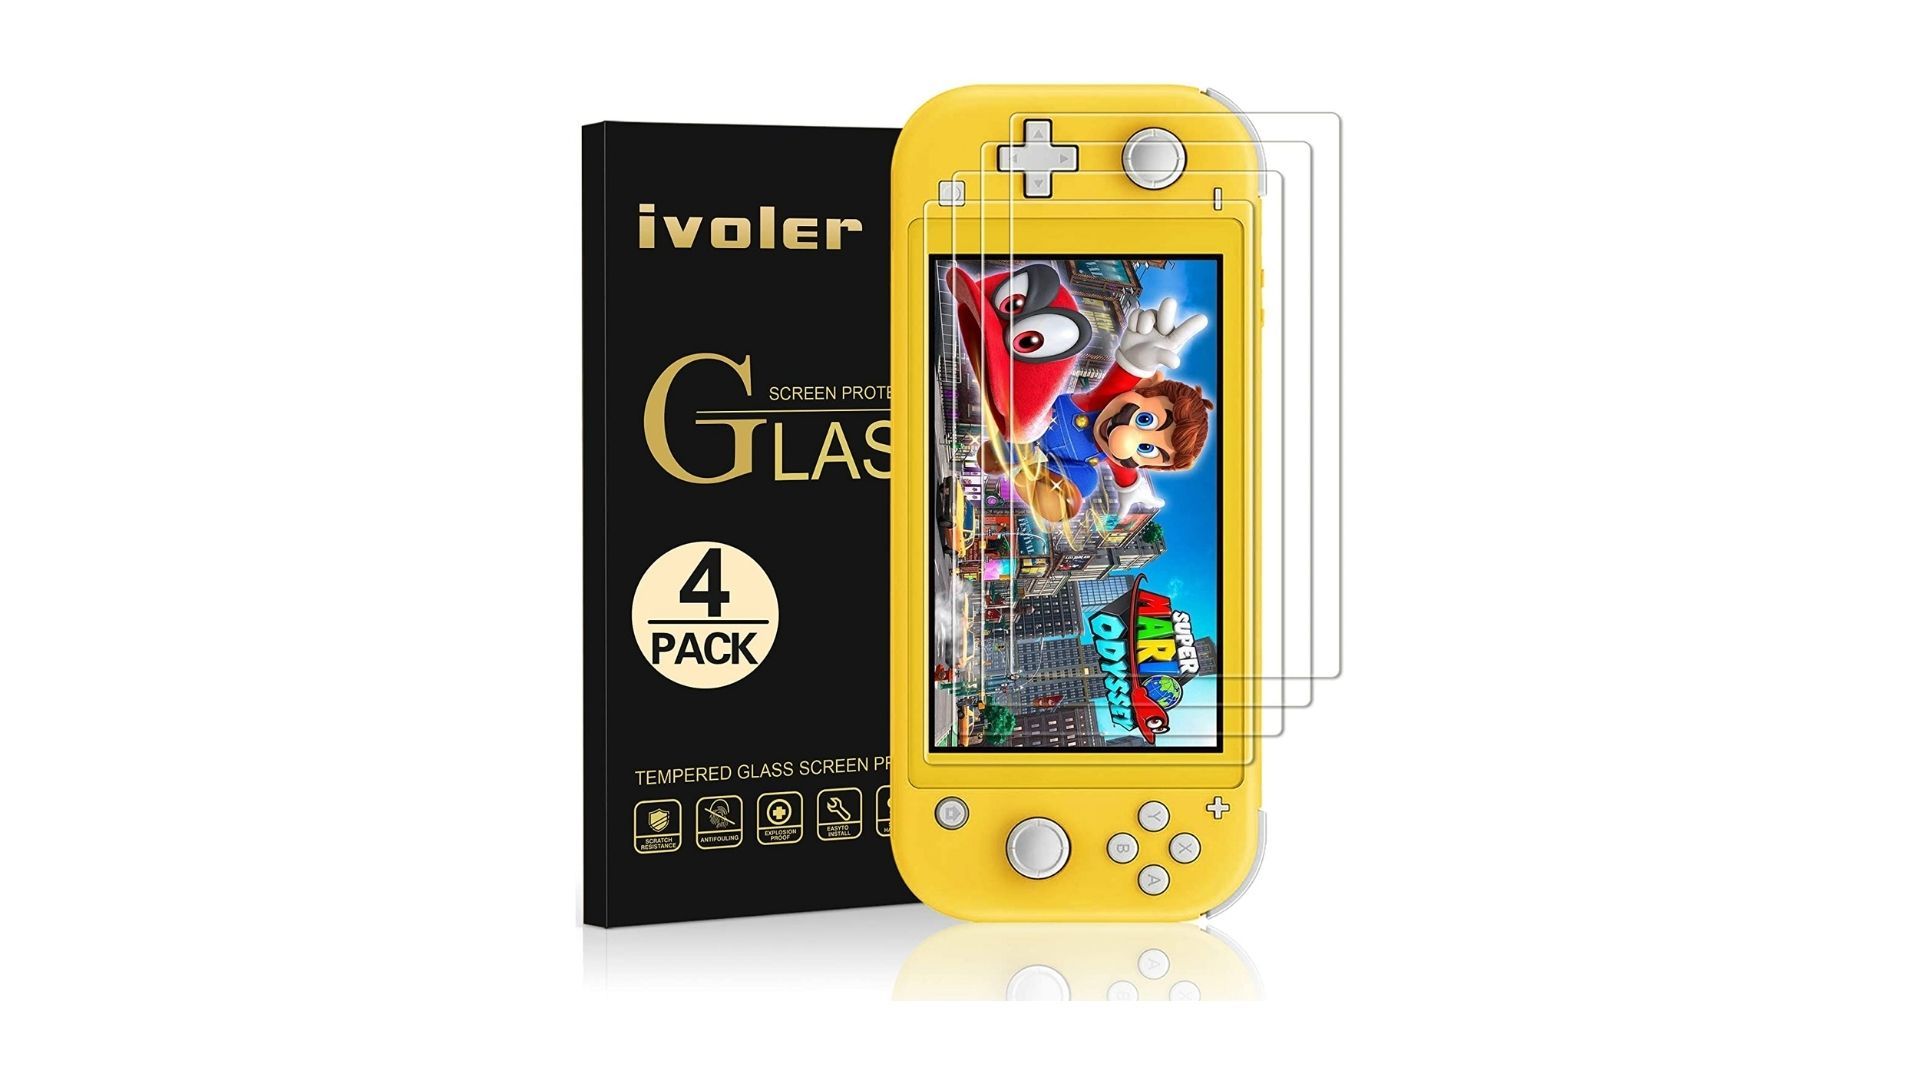 [4 Pack] Screen Protector Tempered Glass for Nintendo Switch Lite from iVoler